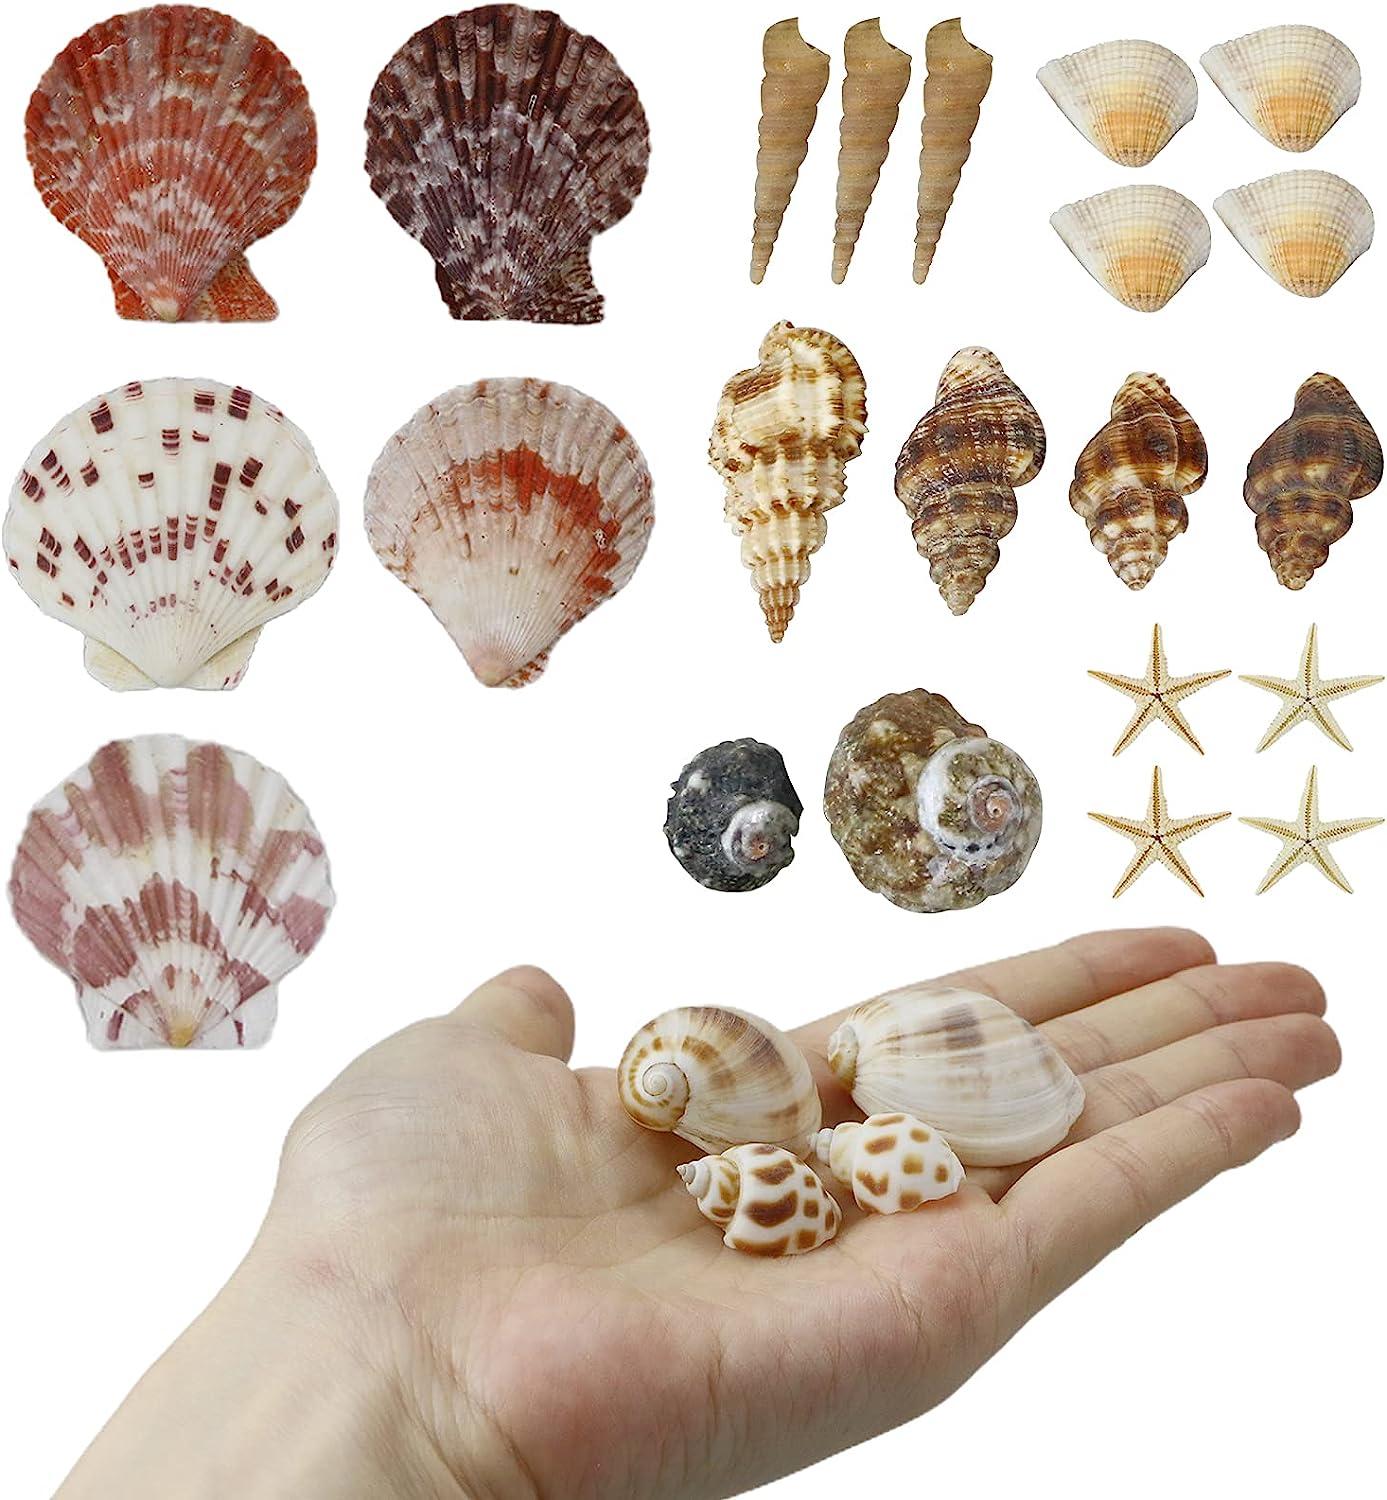 Jangostor 100PCS Sea Shells Mixed Ocean Beach Seashells with Starfish  Perfect for Vase Fillers, Beach Theme Party Home Decorations,DIY Crafts,  Fish